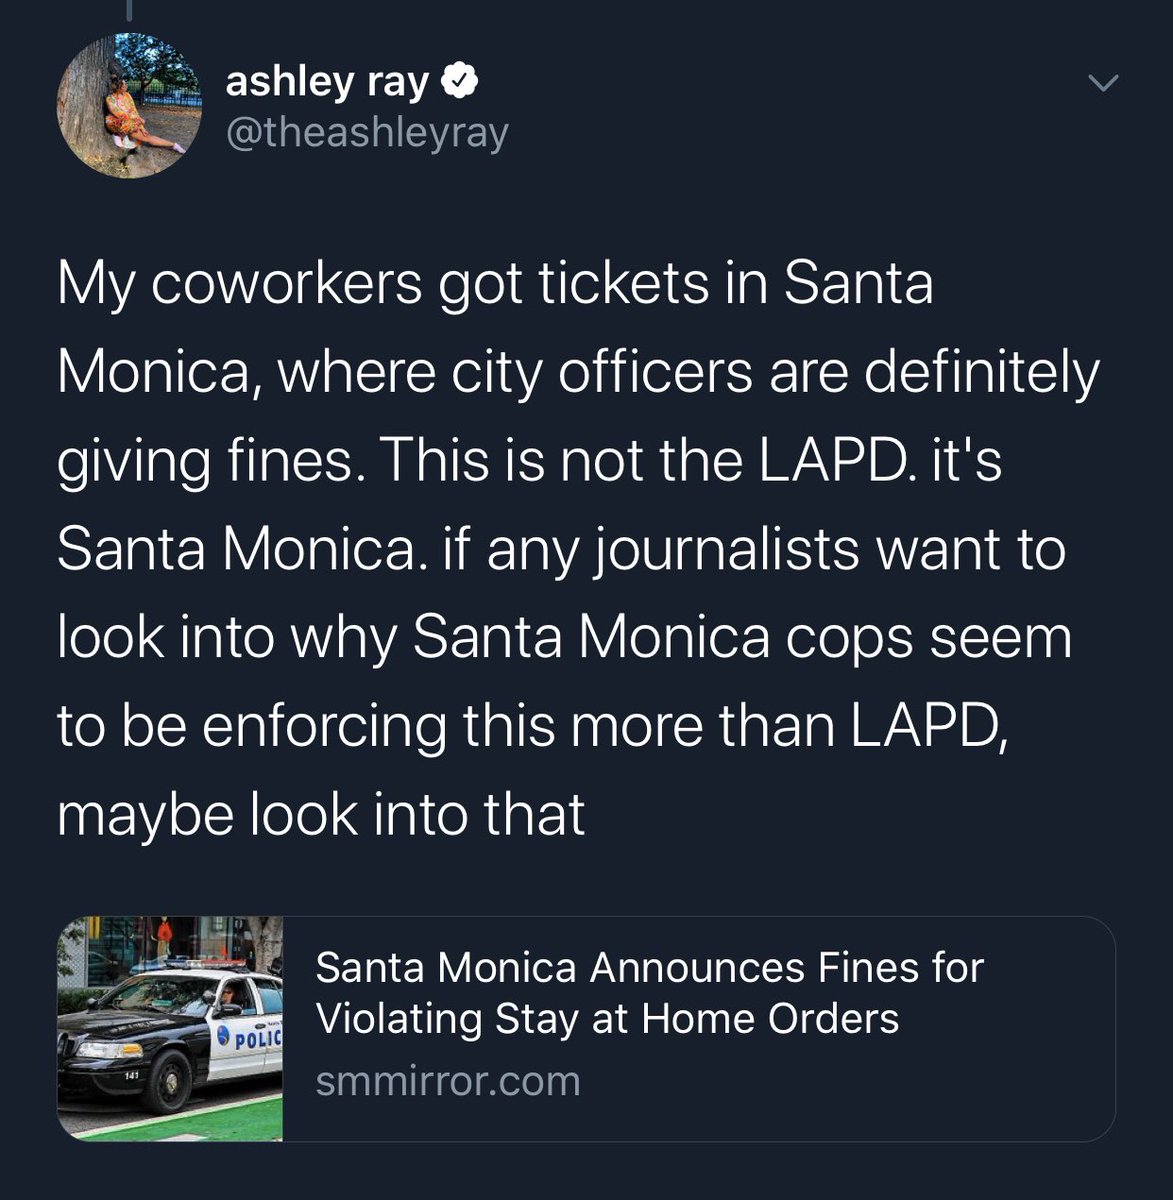 now her “coworkers” got their inflated $400 tickets in santa monica despite the mythical checkpoints were in mid-city. please note the first violation is $100. hang it up, sister. FLATSCREEN.